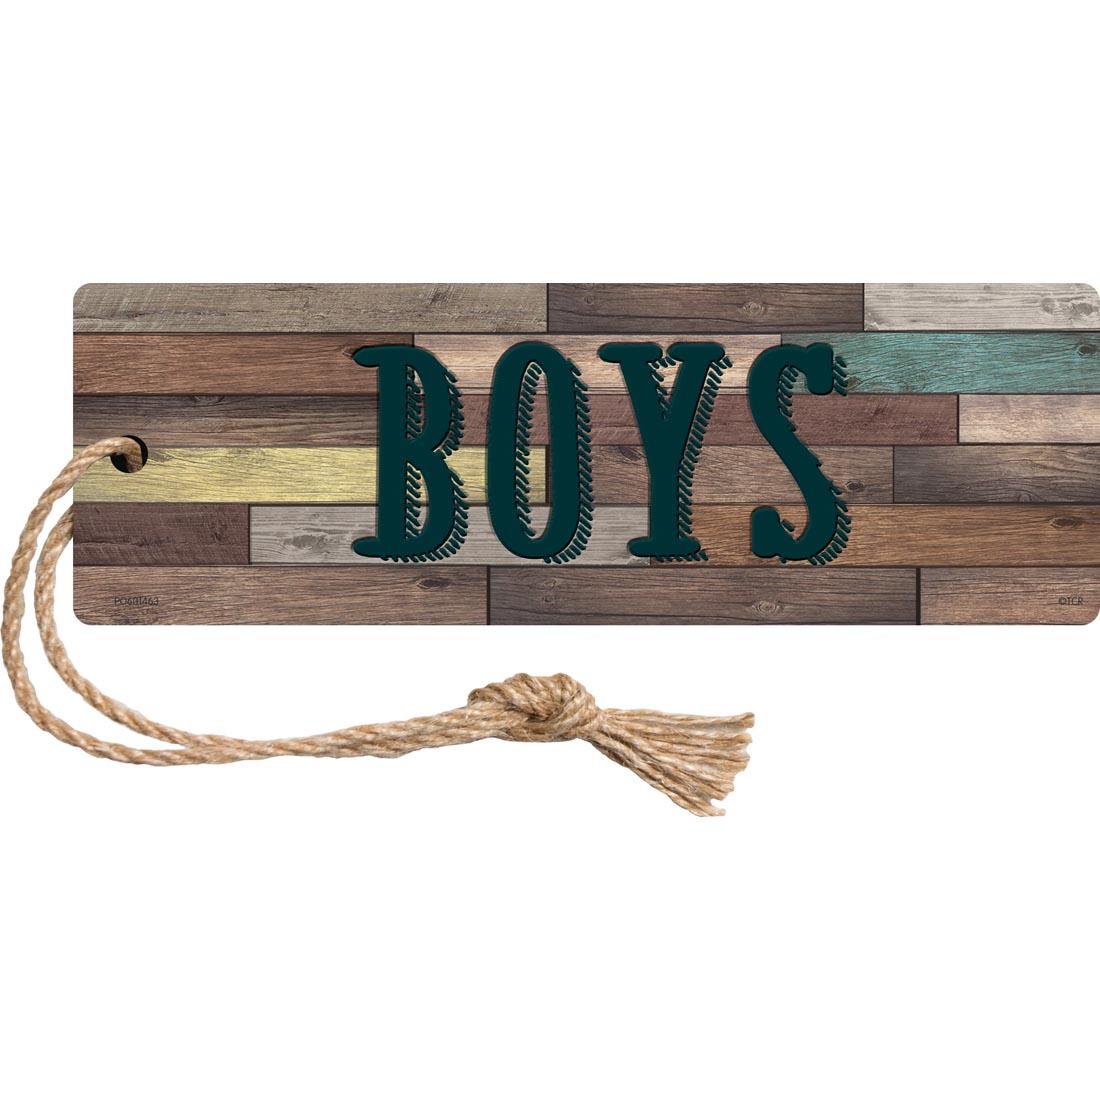 Magnetic Boys Pass from the Home Sweet Classroom collection by Teacher Created Resources